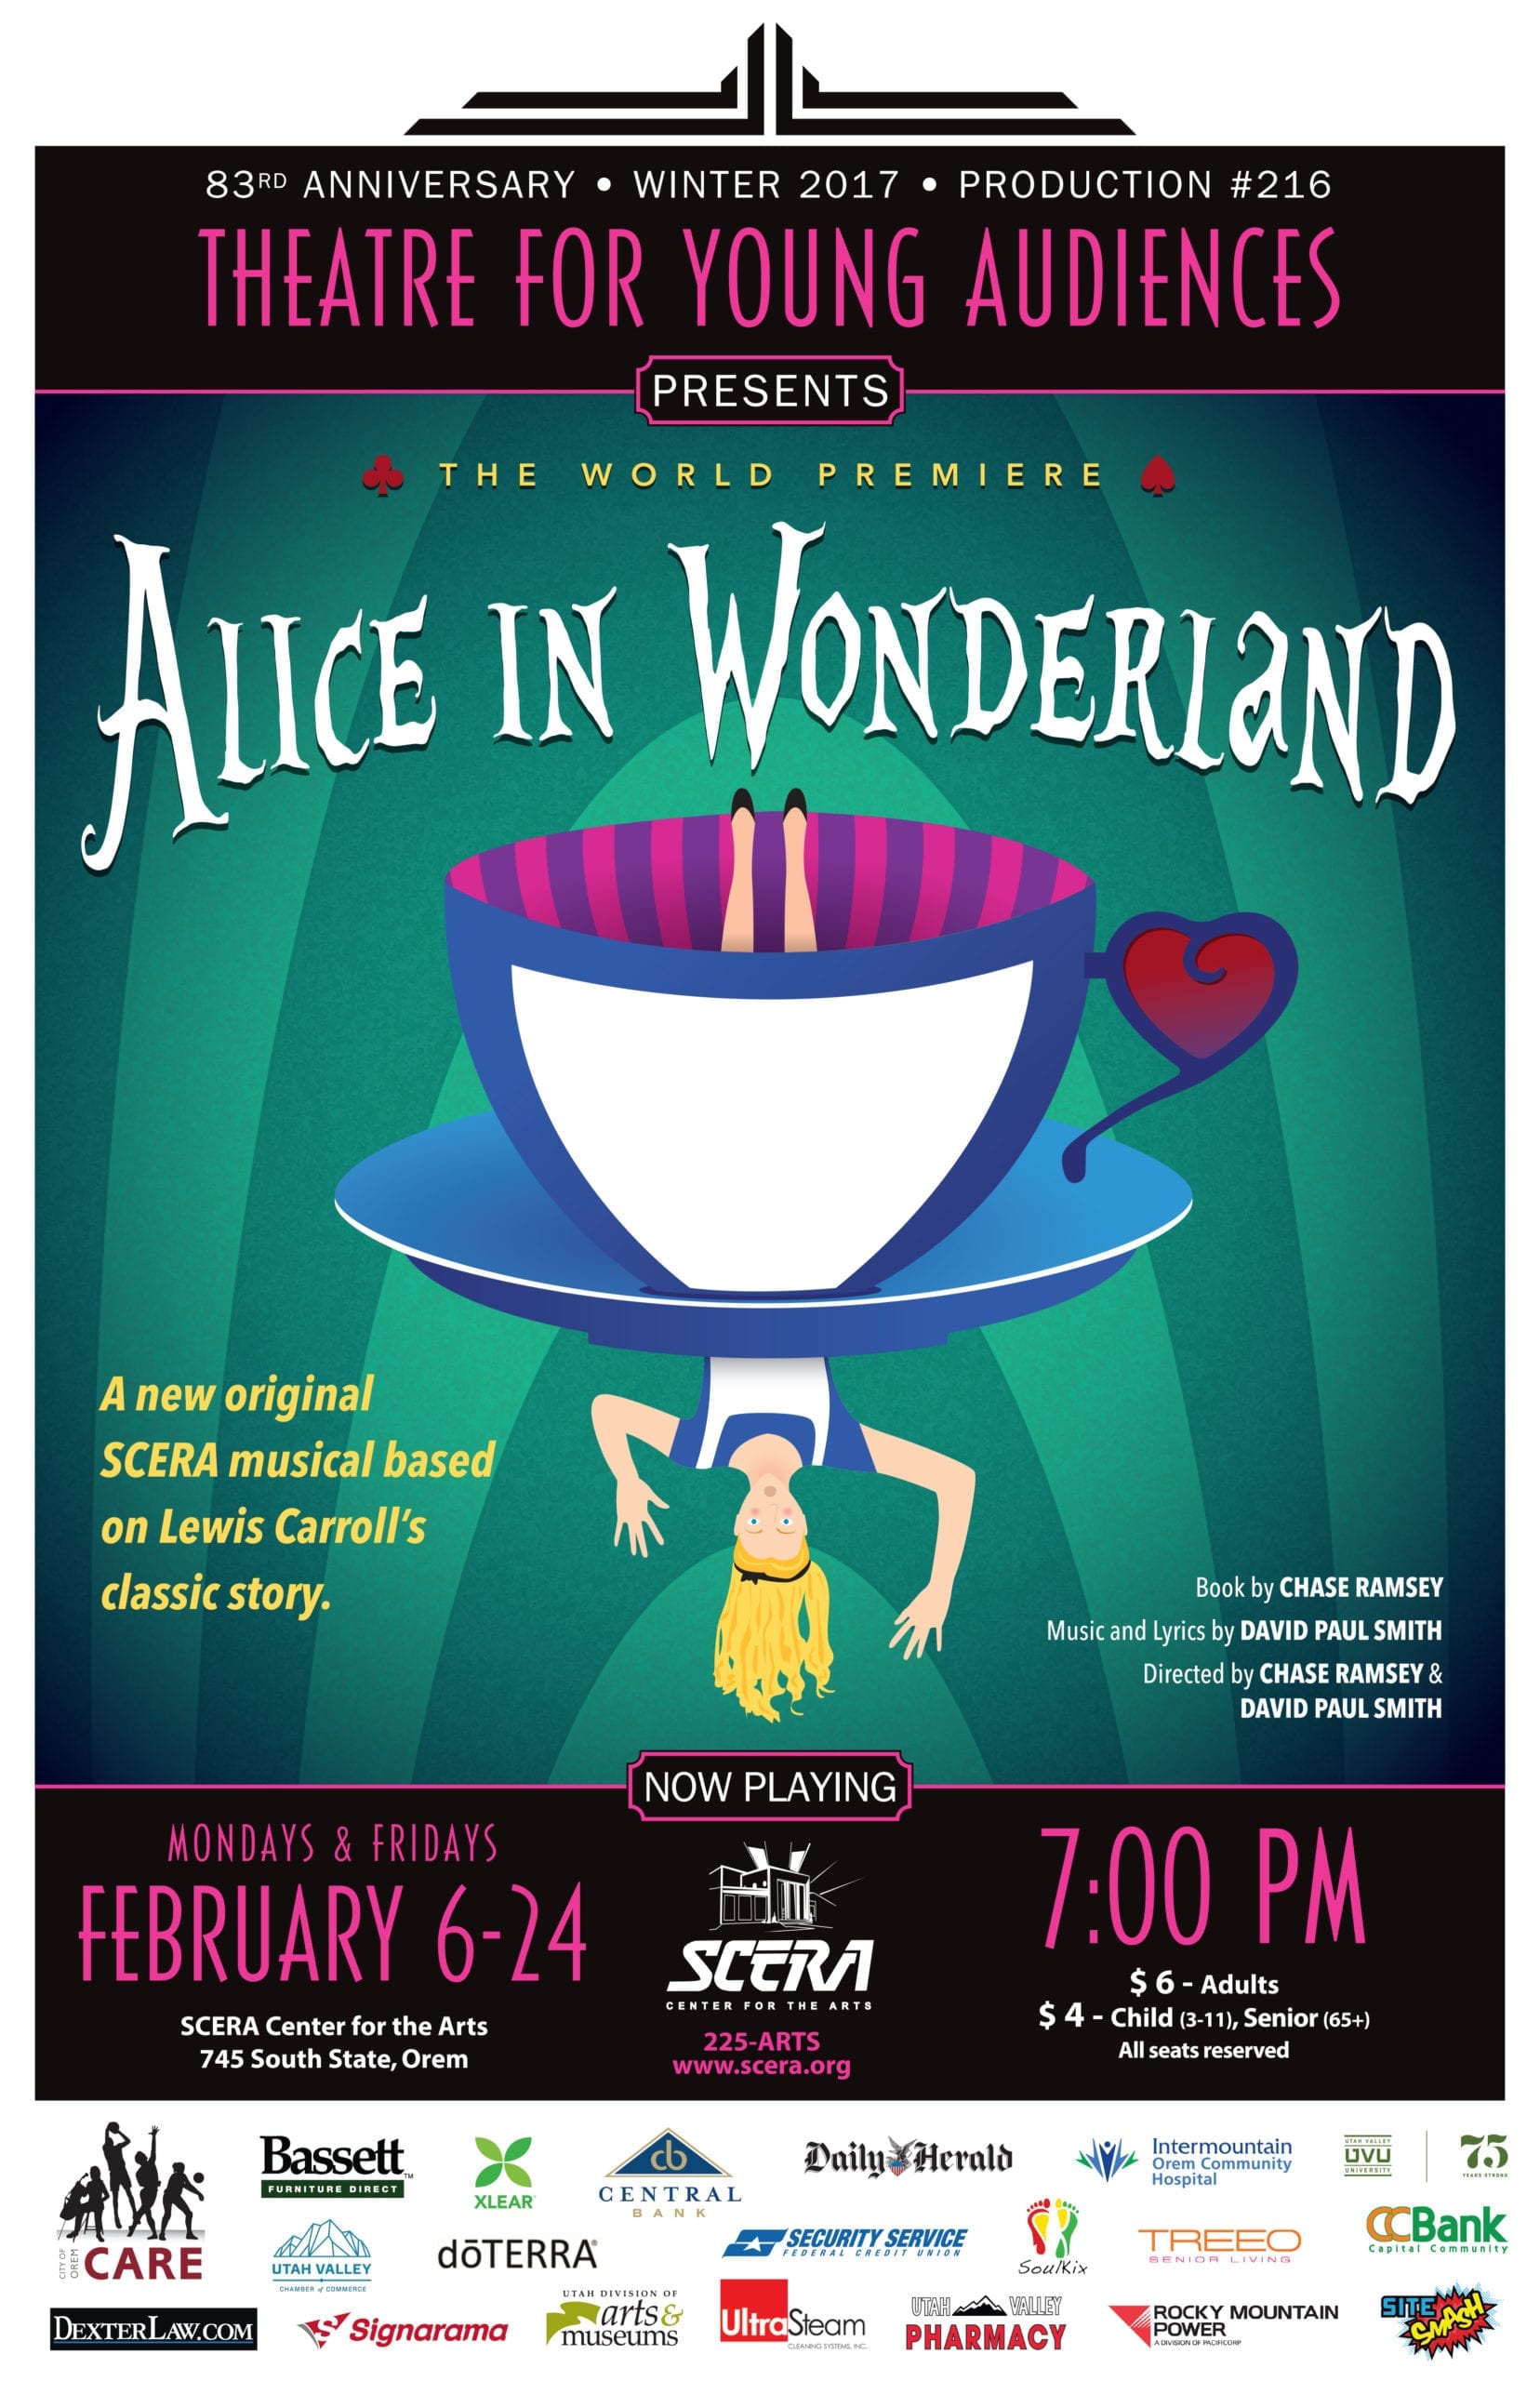 New ALICE IN WONDERLAND musical is a good match for young kids | Utah ...